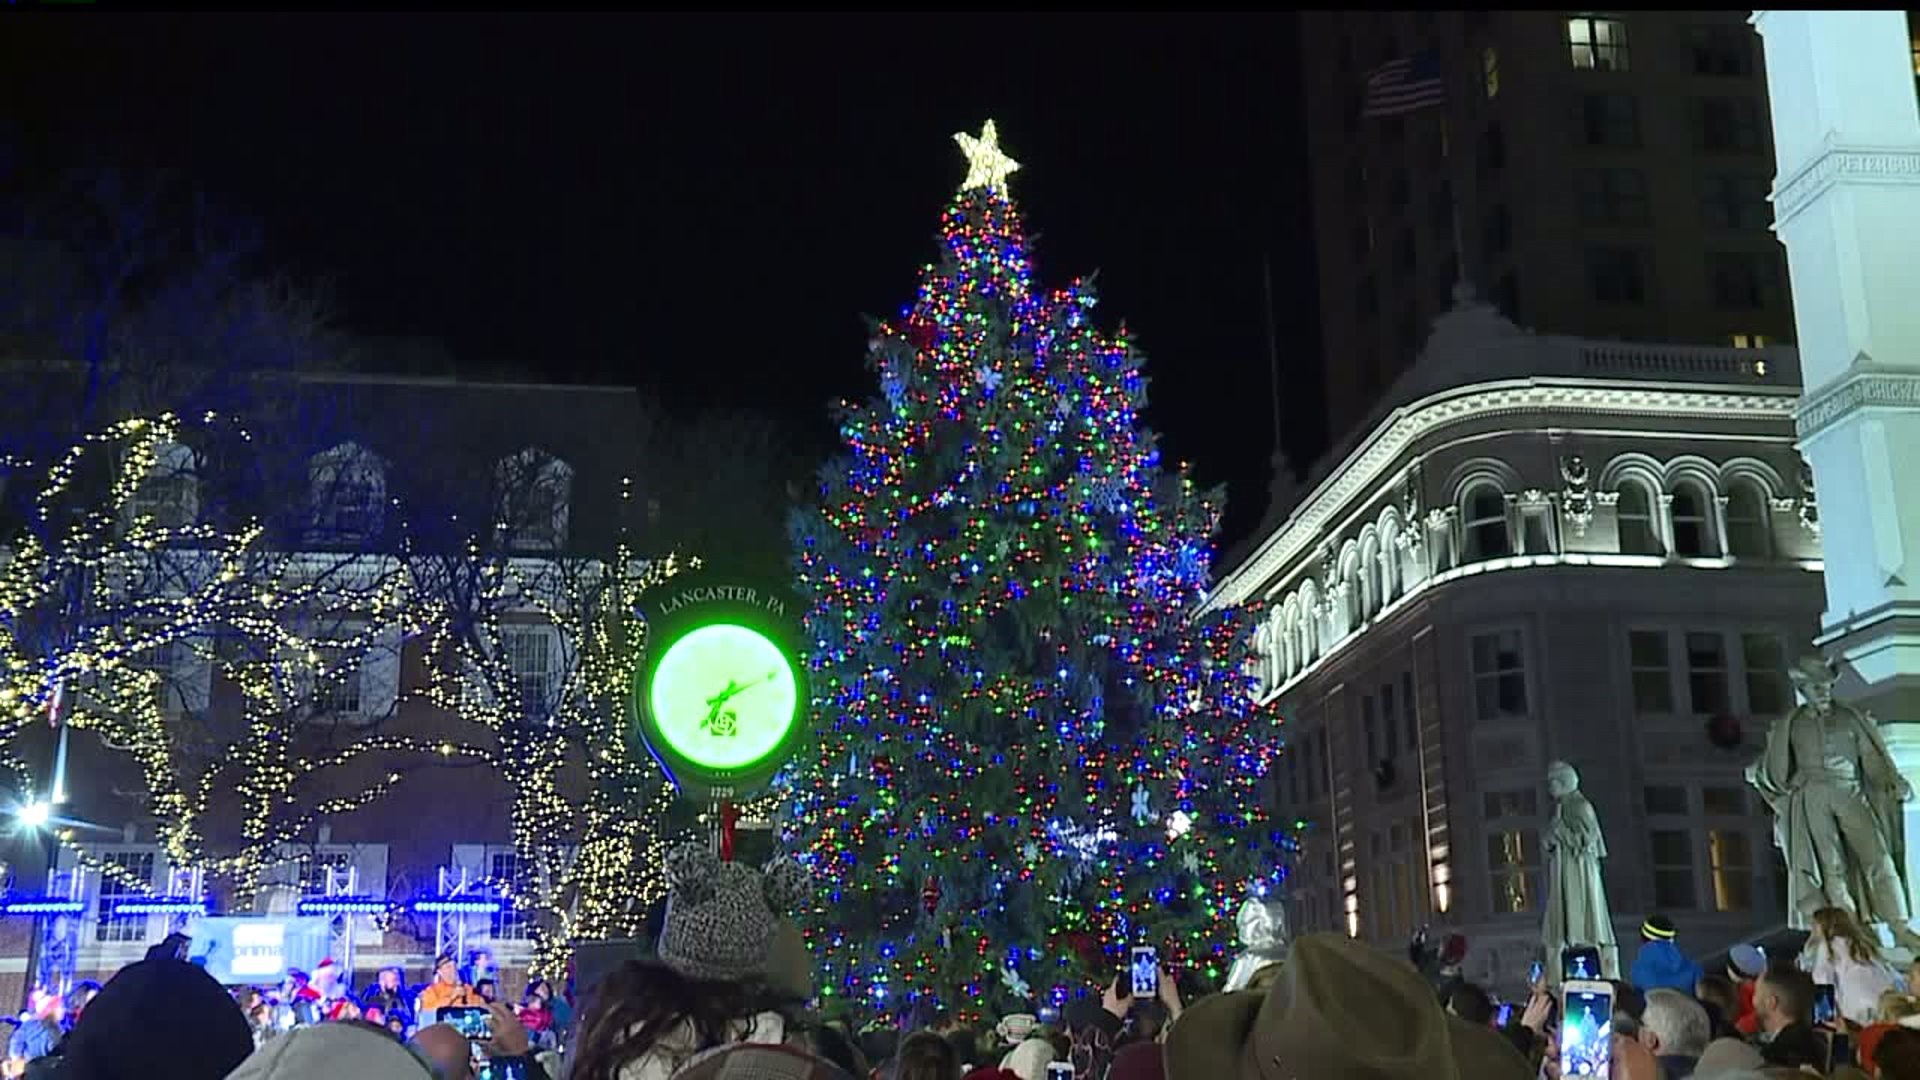 Annual Mayor’s Tree Lighting in Lancaster draws thousands to Penn